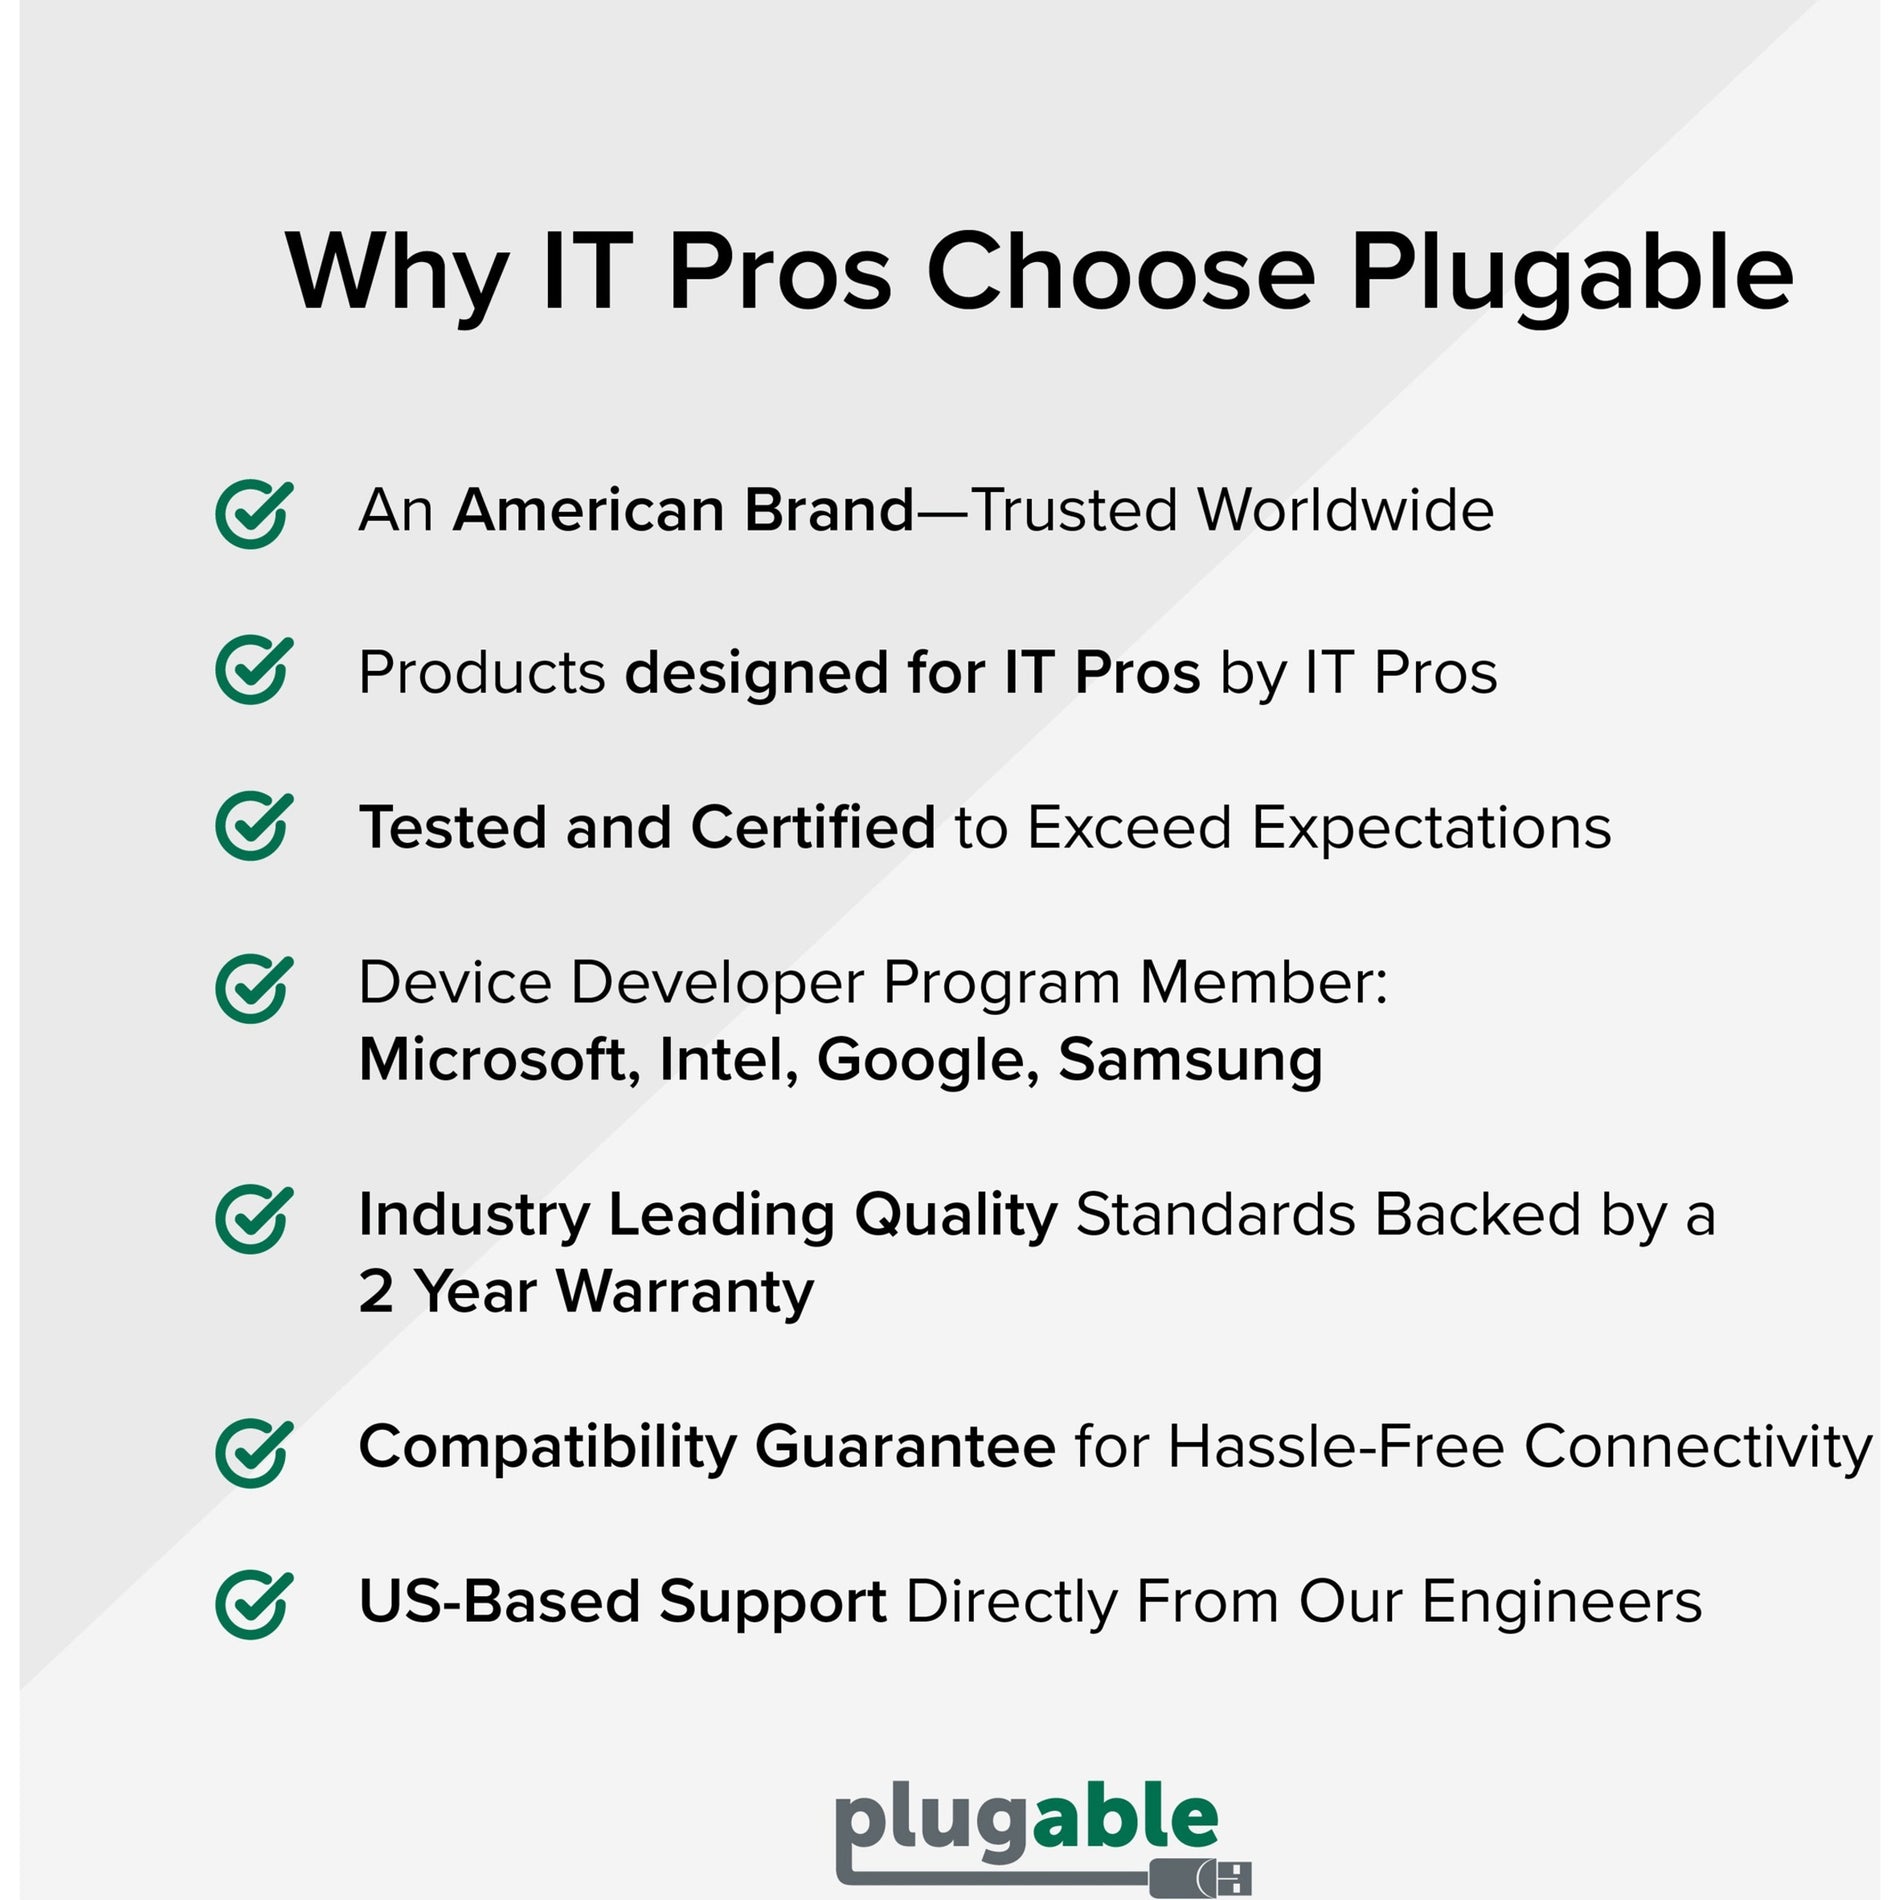 Plugable UGA-2KHDMI USB 3.0 to HDMI Video Graphics Adapter with Audio for Multiple Monitors, 2560 x 1440 Resolution